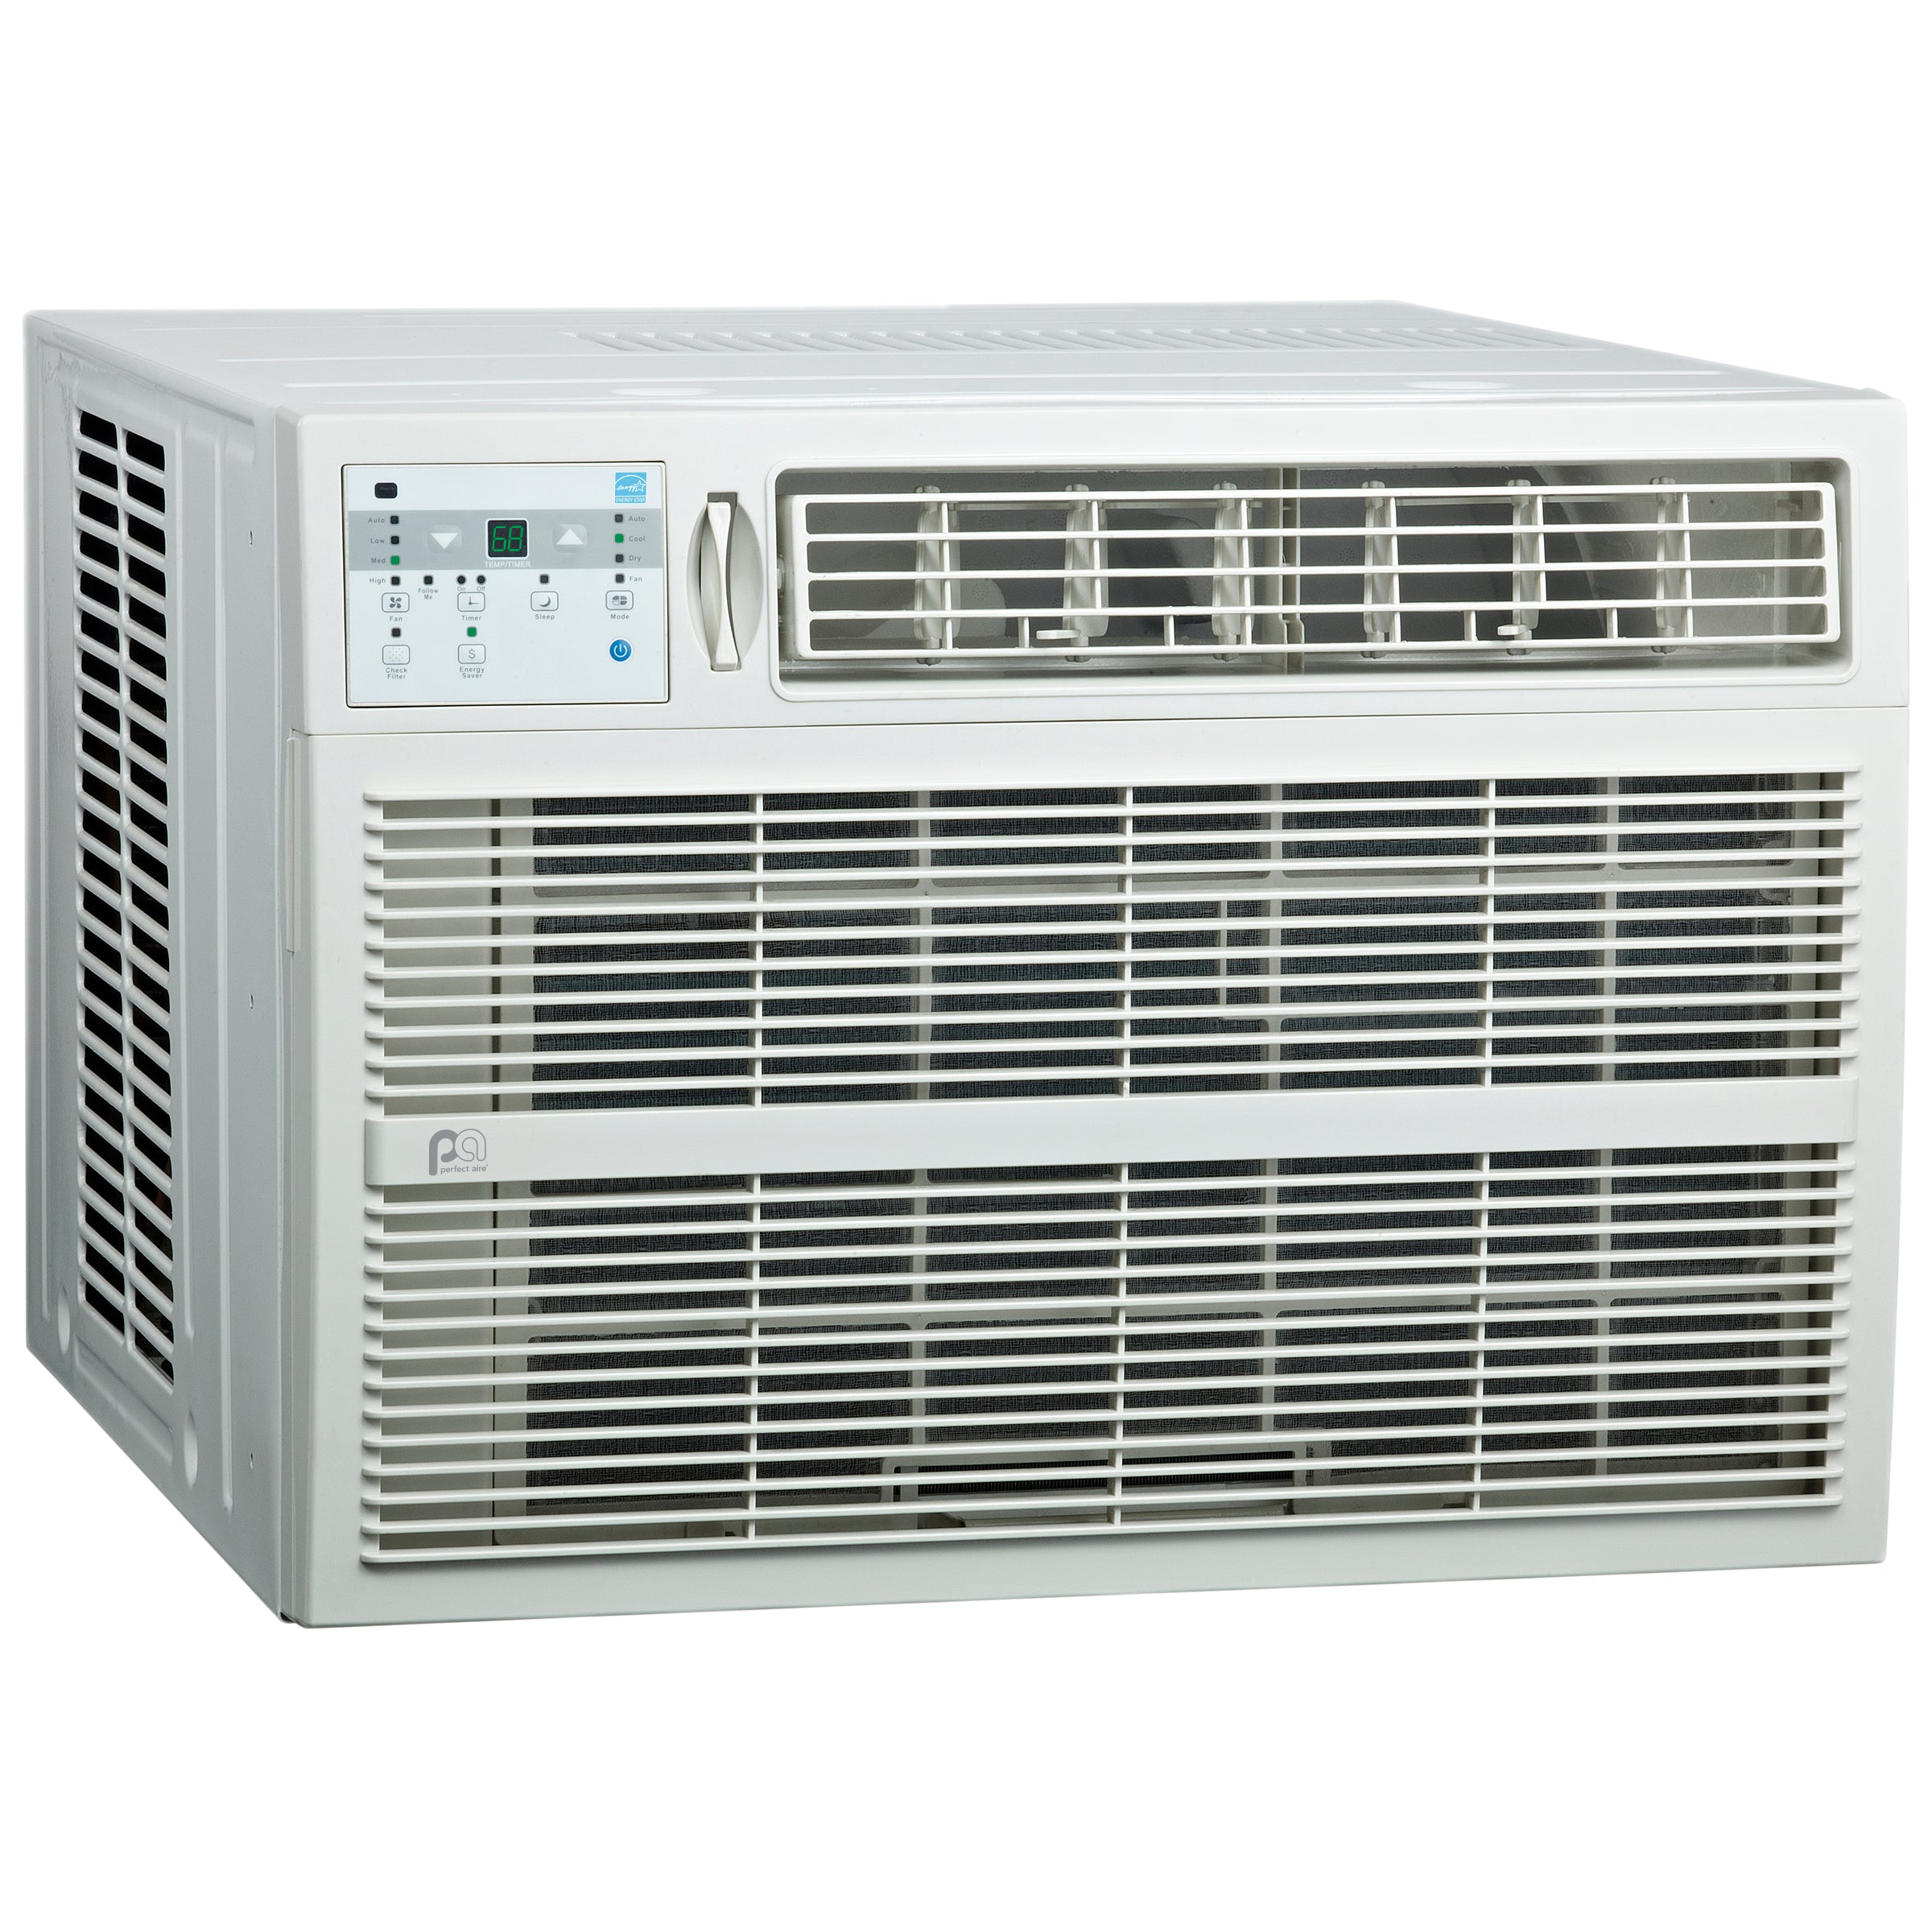 5PAC18000 Perfect Aire 18,000 BTU ENERGY STAR Window Room Air Conditioner, Sq. ft: 700-1,000 Coverage, With Remote Control